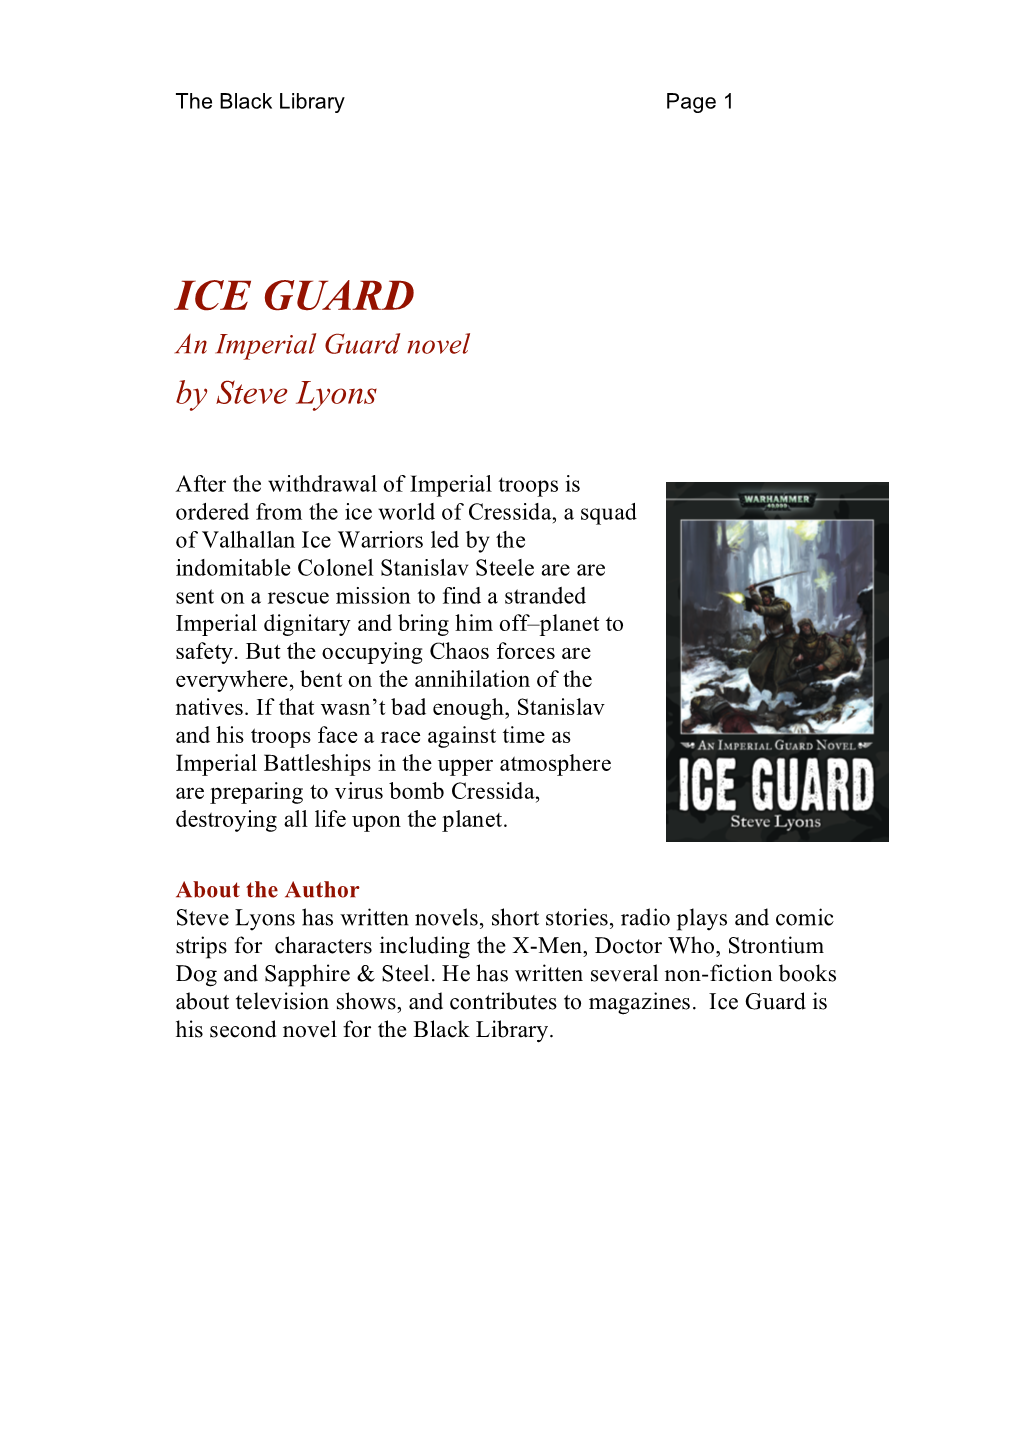 ICE GUARD an Imperial Guard Novel by Steve Lyons